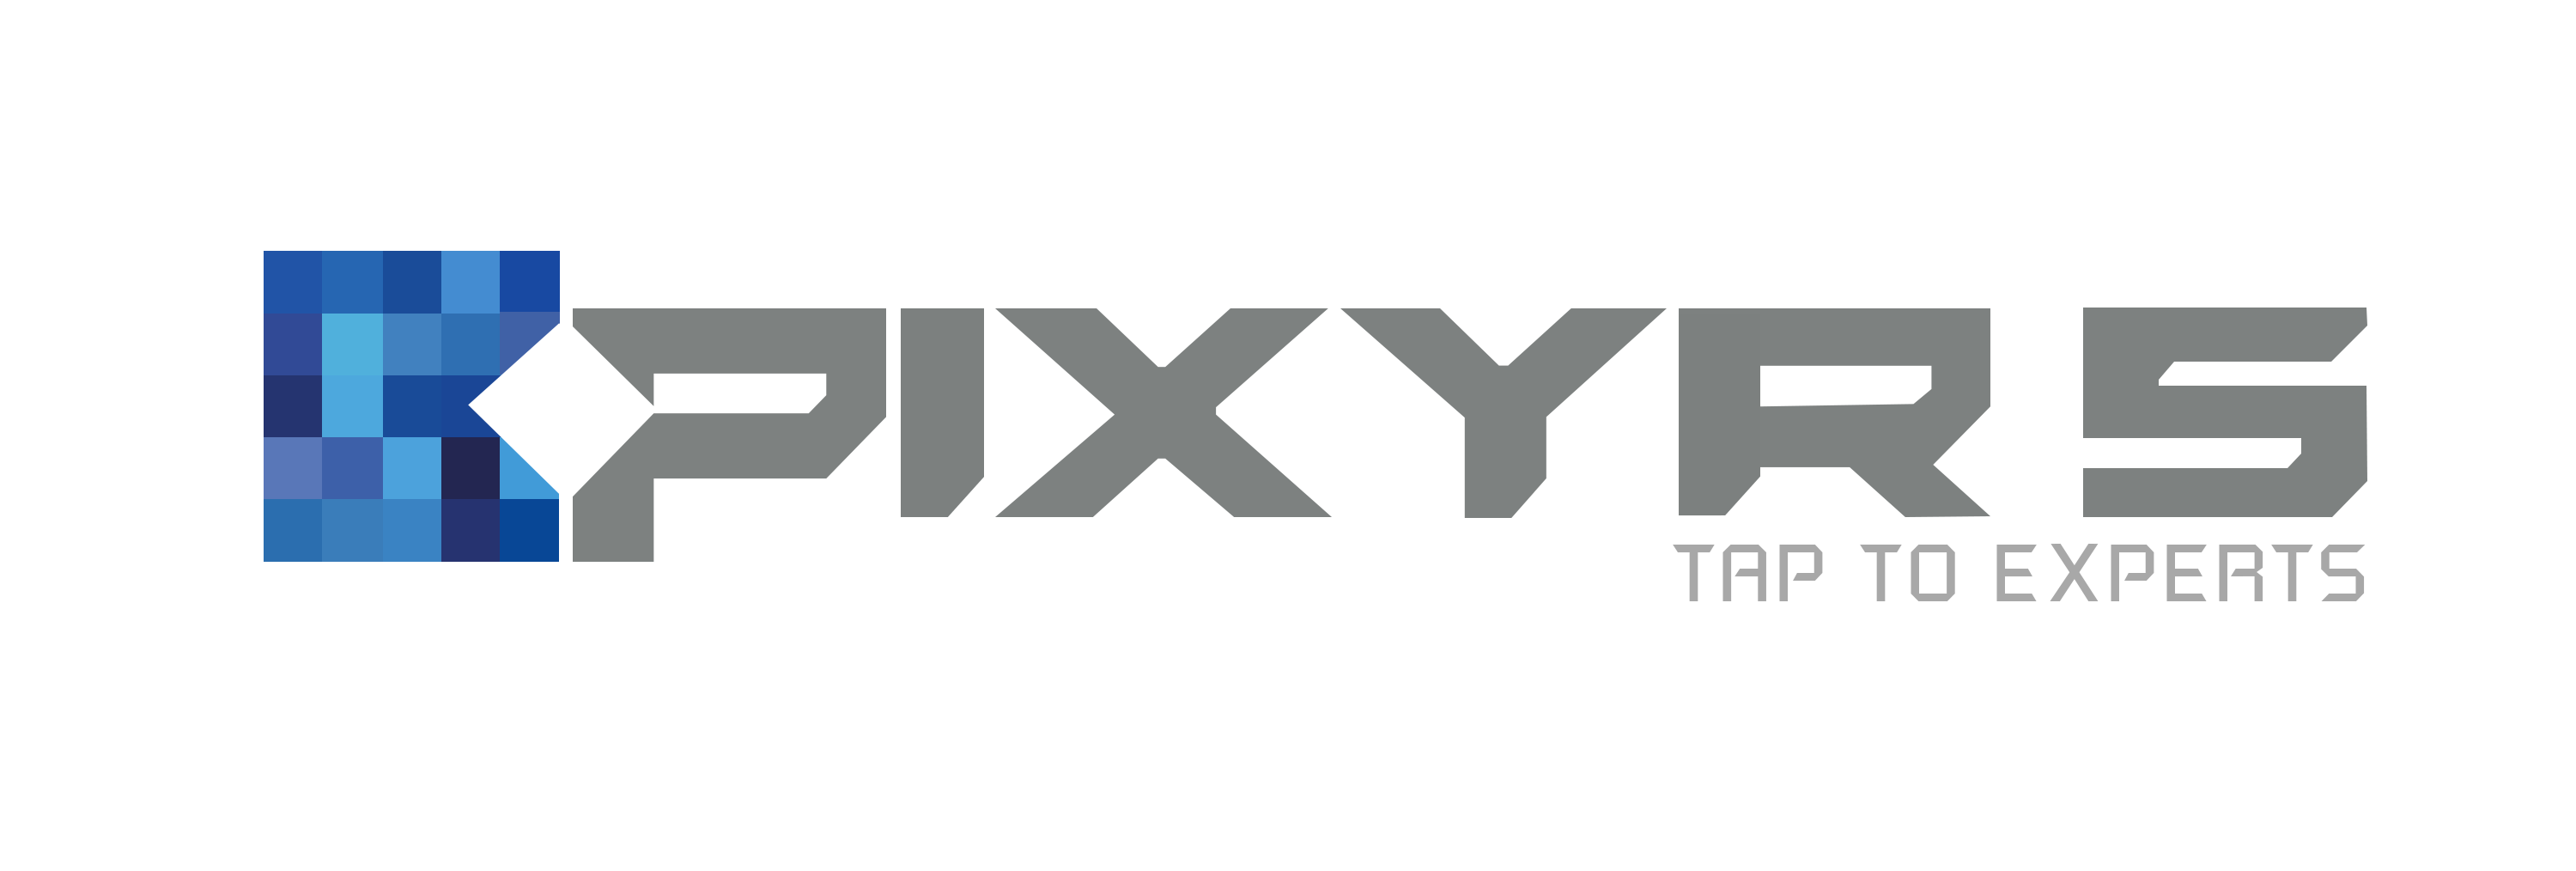 PIXYRS SOFTECH AND RESEARCH PRIVATE LIMITED profile on Qualified.One